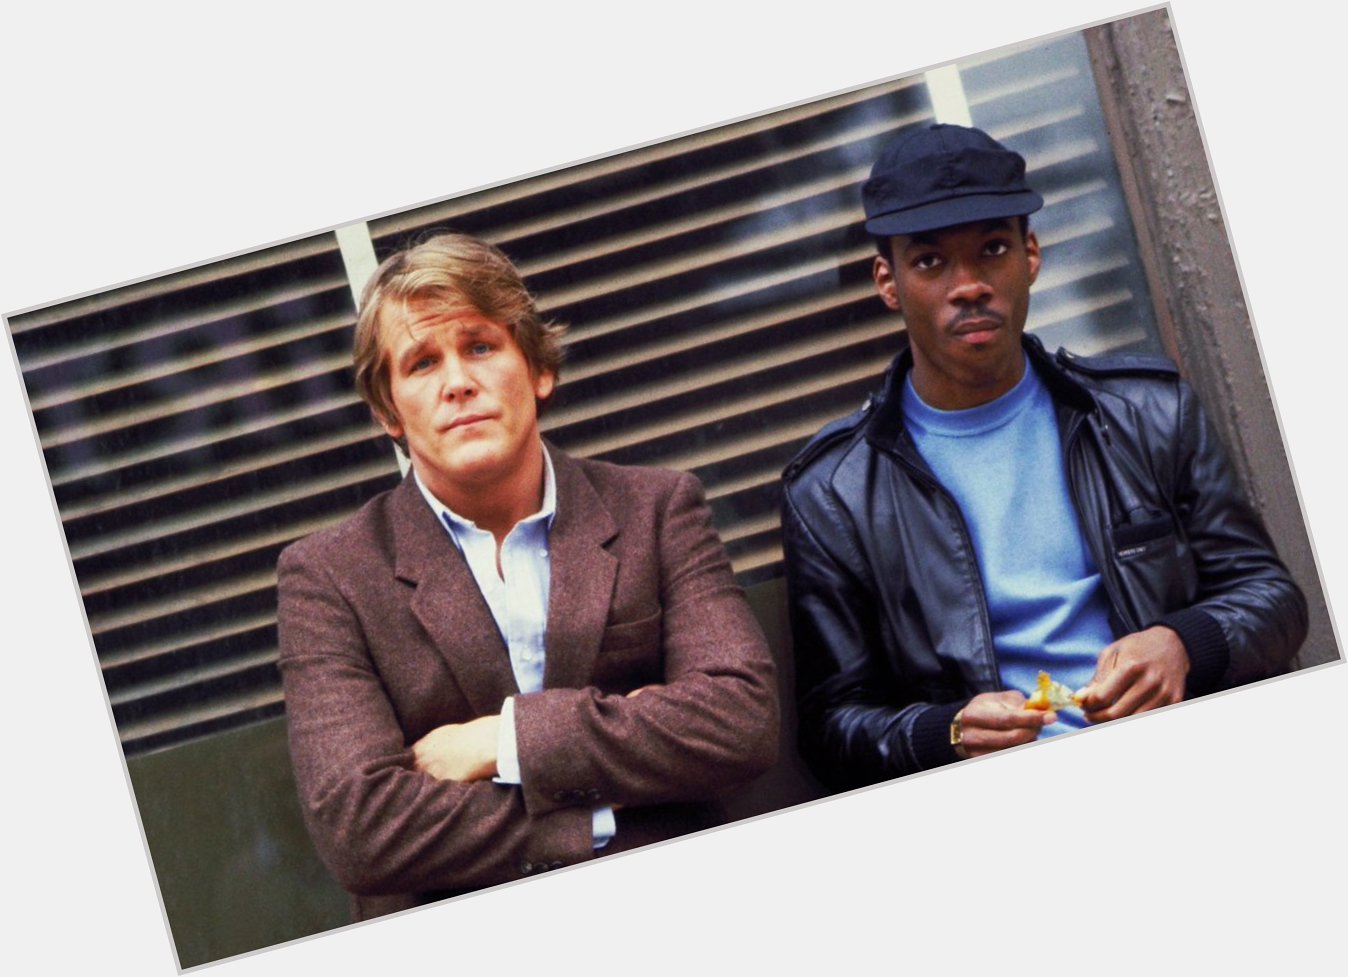 Happy Birthday to Nick Nolte(left), who turns 76 today! 